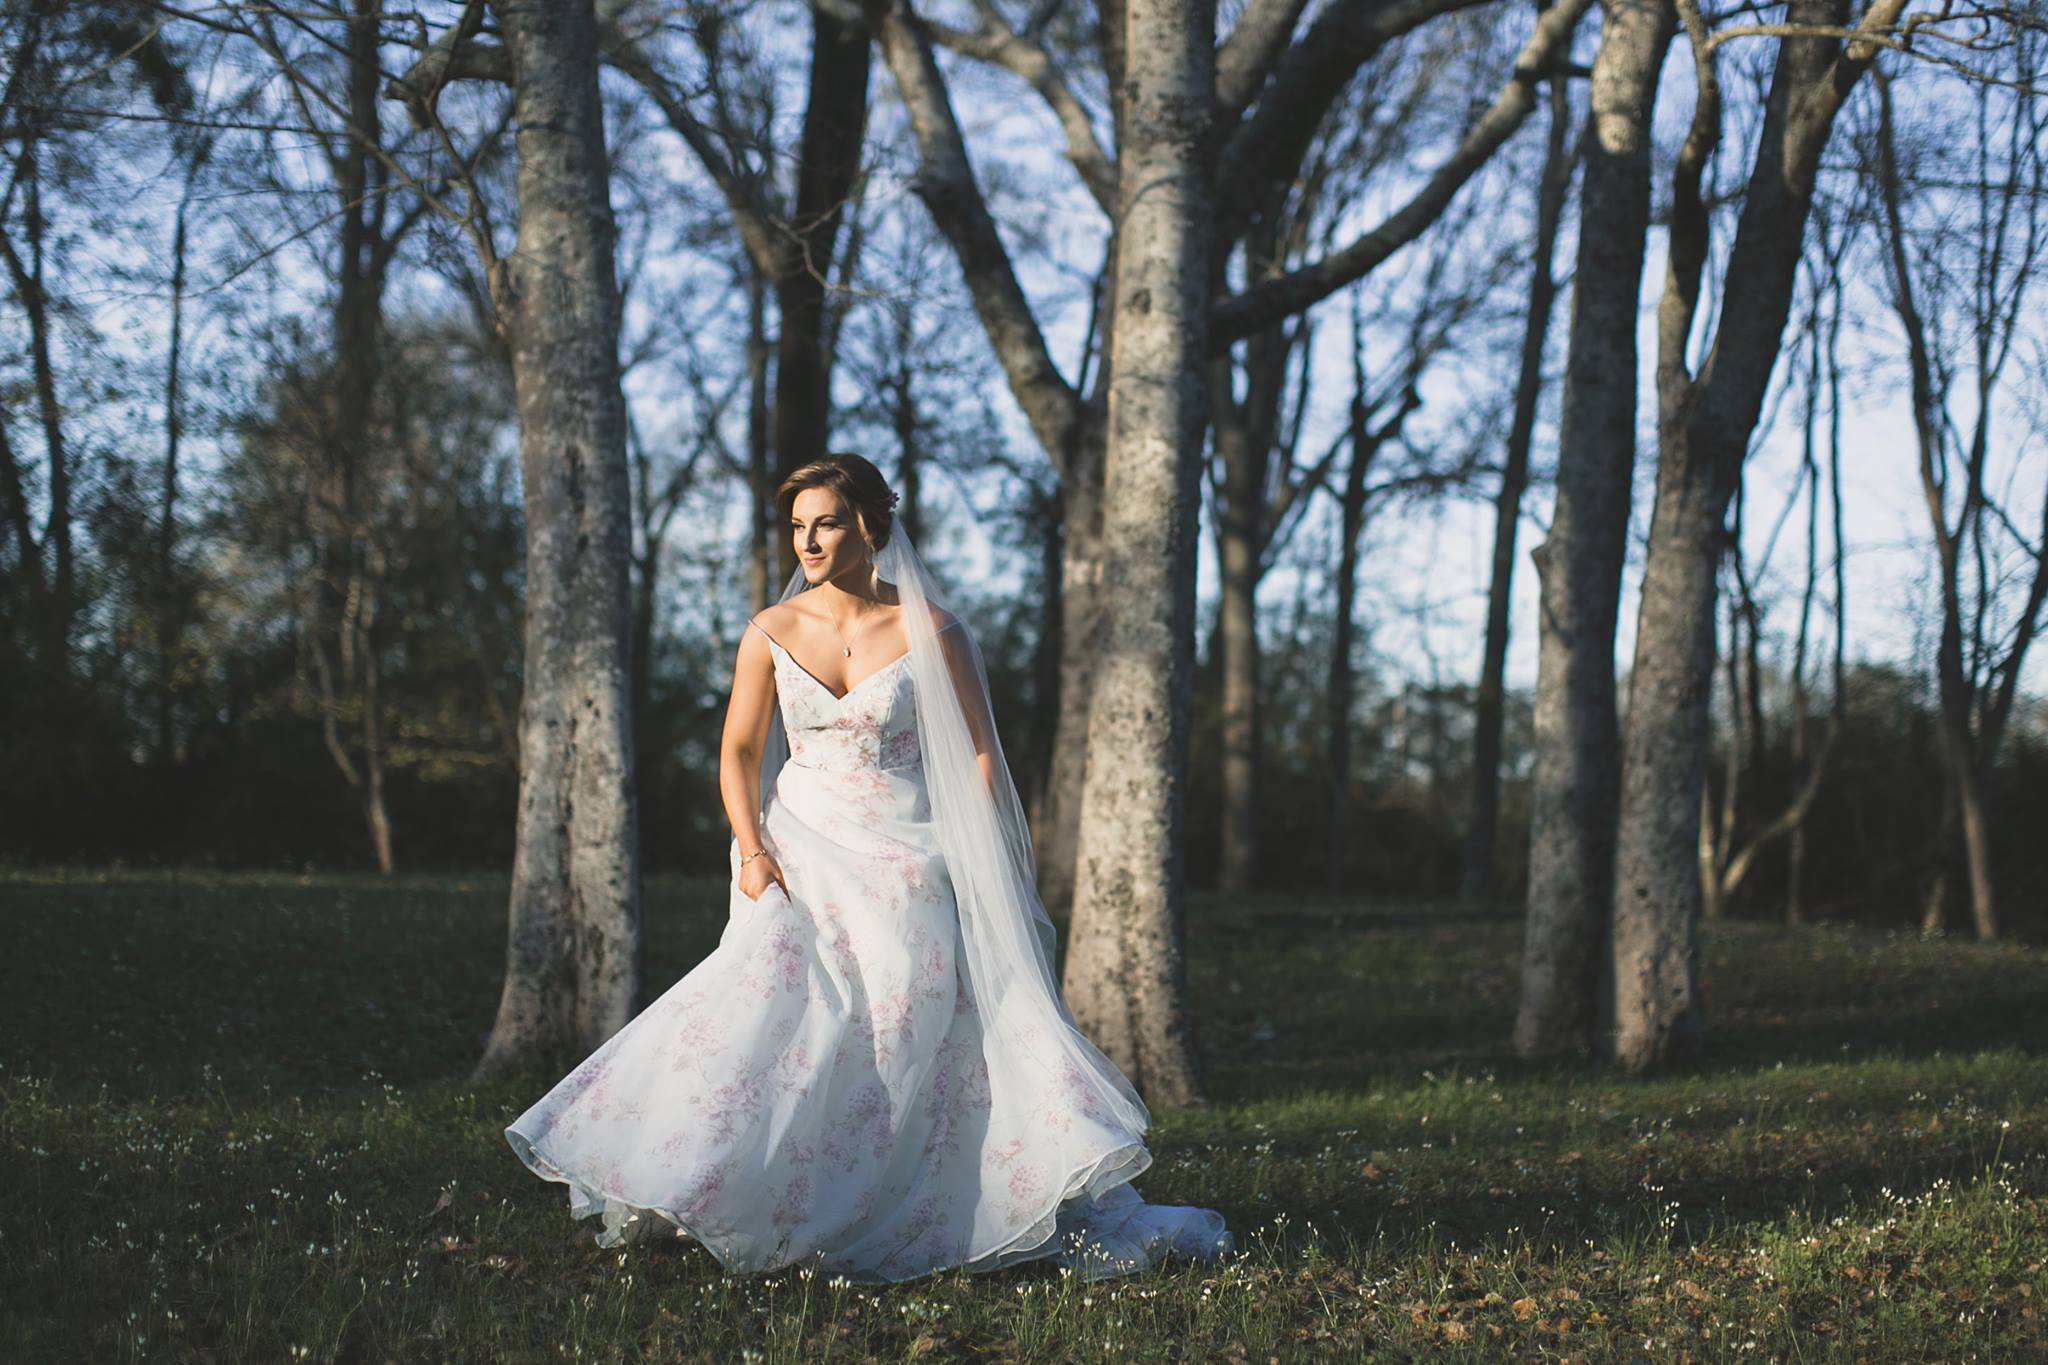 Blue Wedding Dress in Cajun and French-Inspired Bridal Session - Midgley Bride wearing Kira by Sottero and Midgley